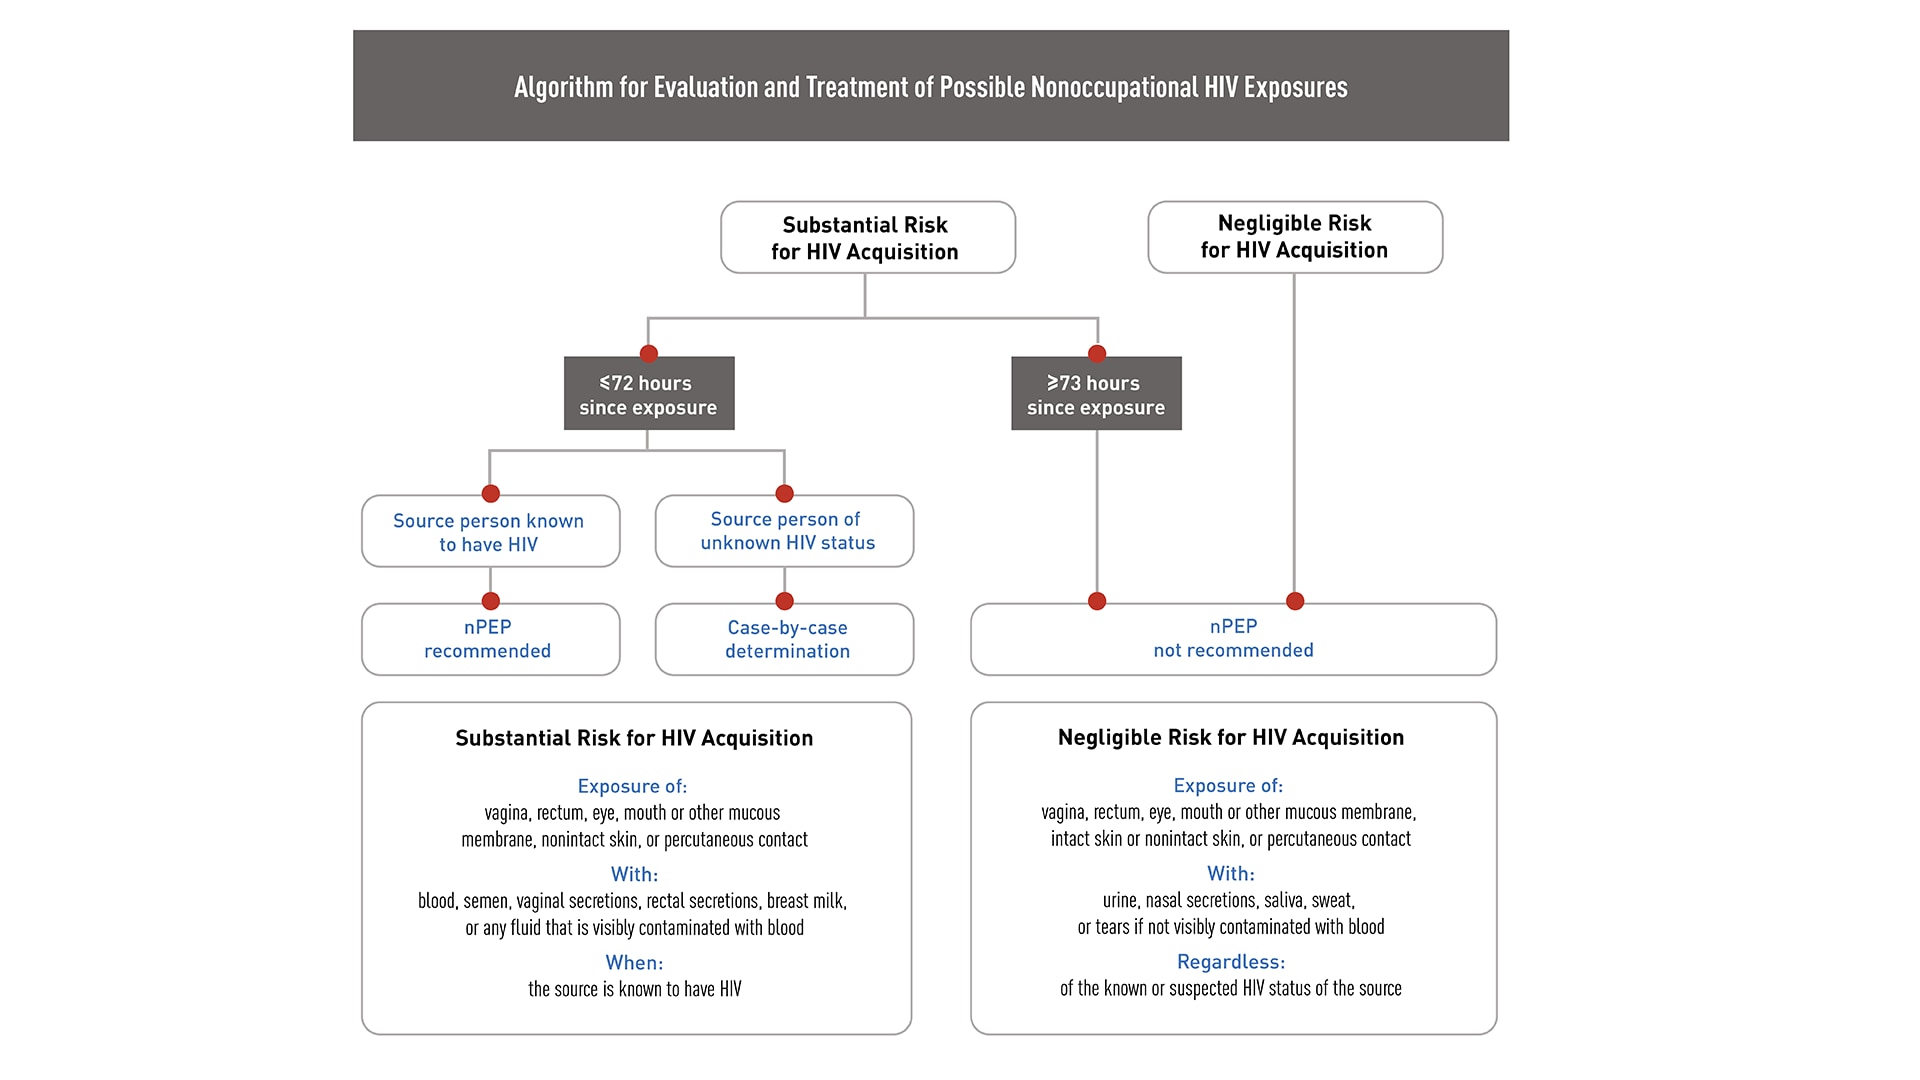 This flowchart shows how to evaluate a patient and decide whether to treat possible HIV exposure with PEP.